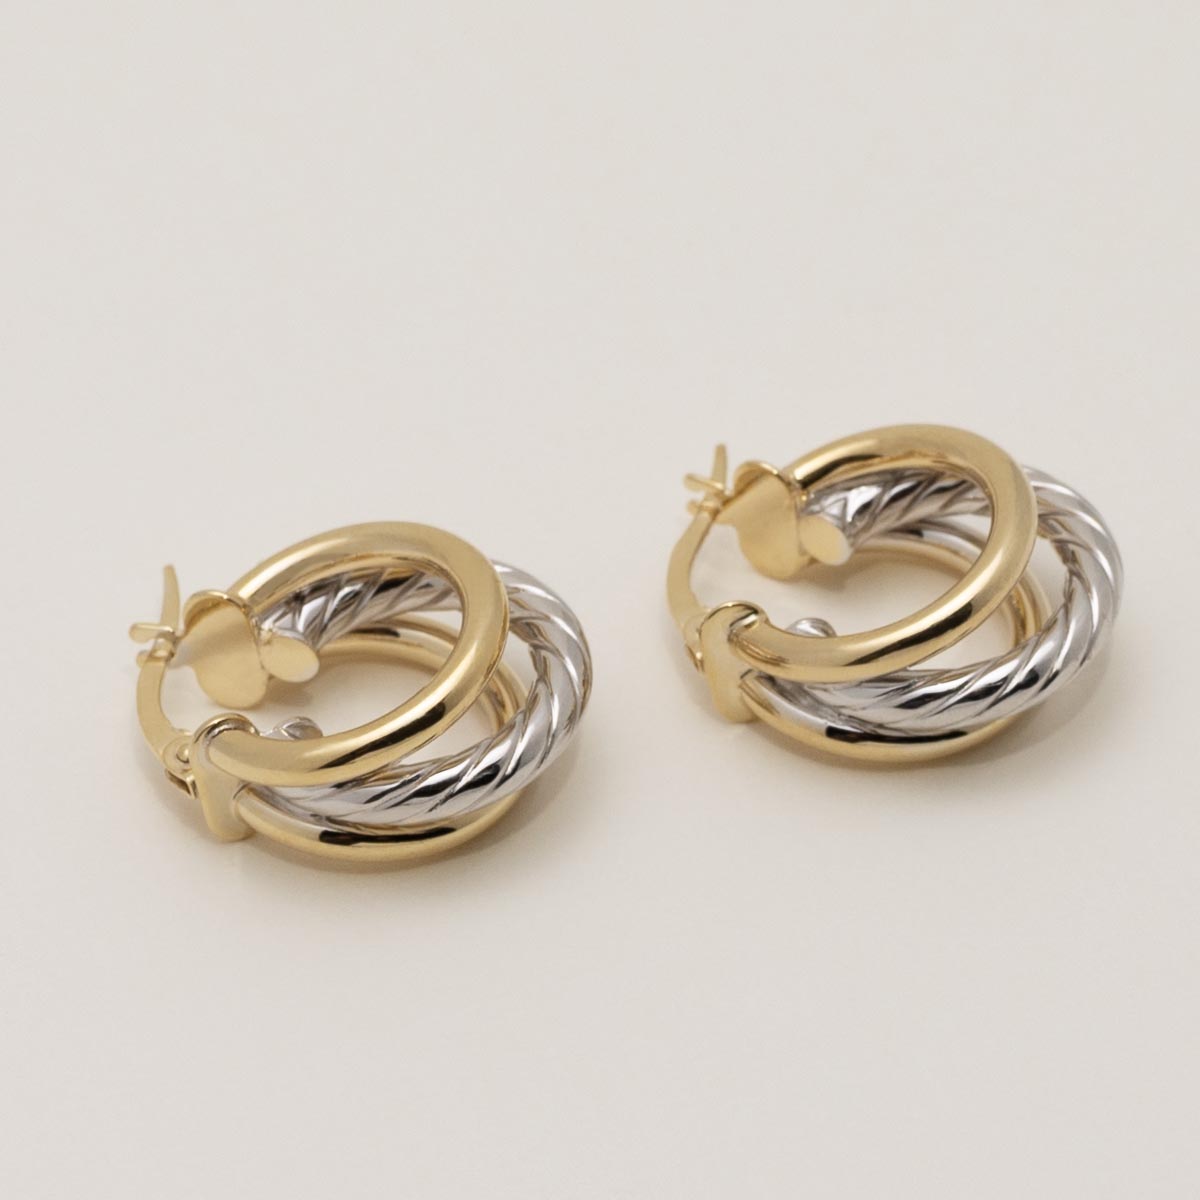 Triple Hoop Earrings in 14kt Yellow and White Gold